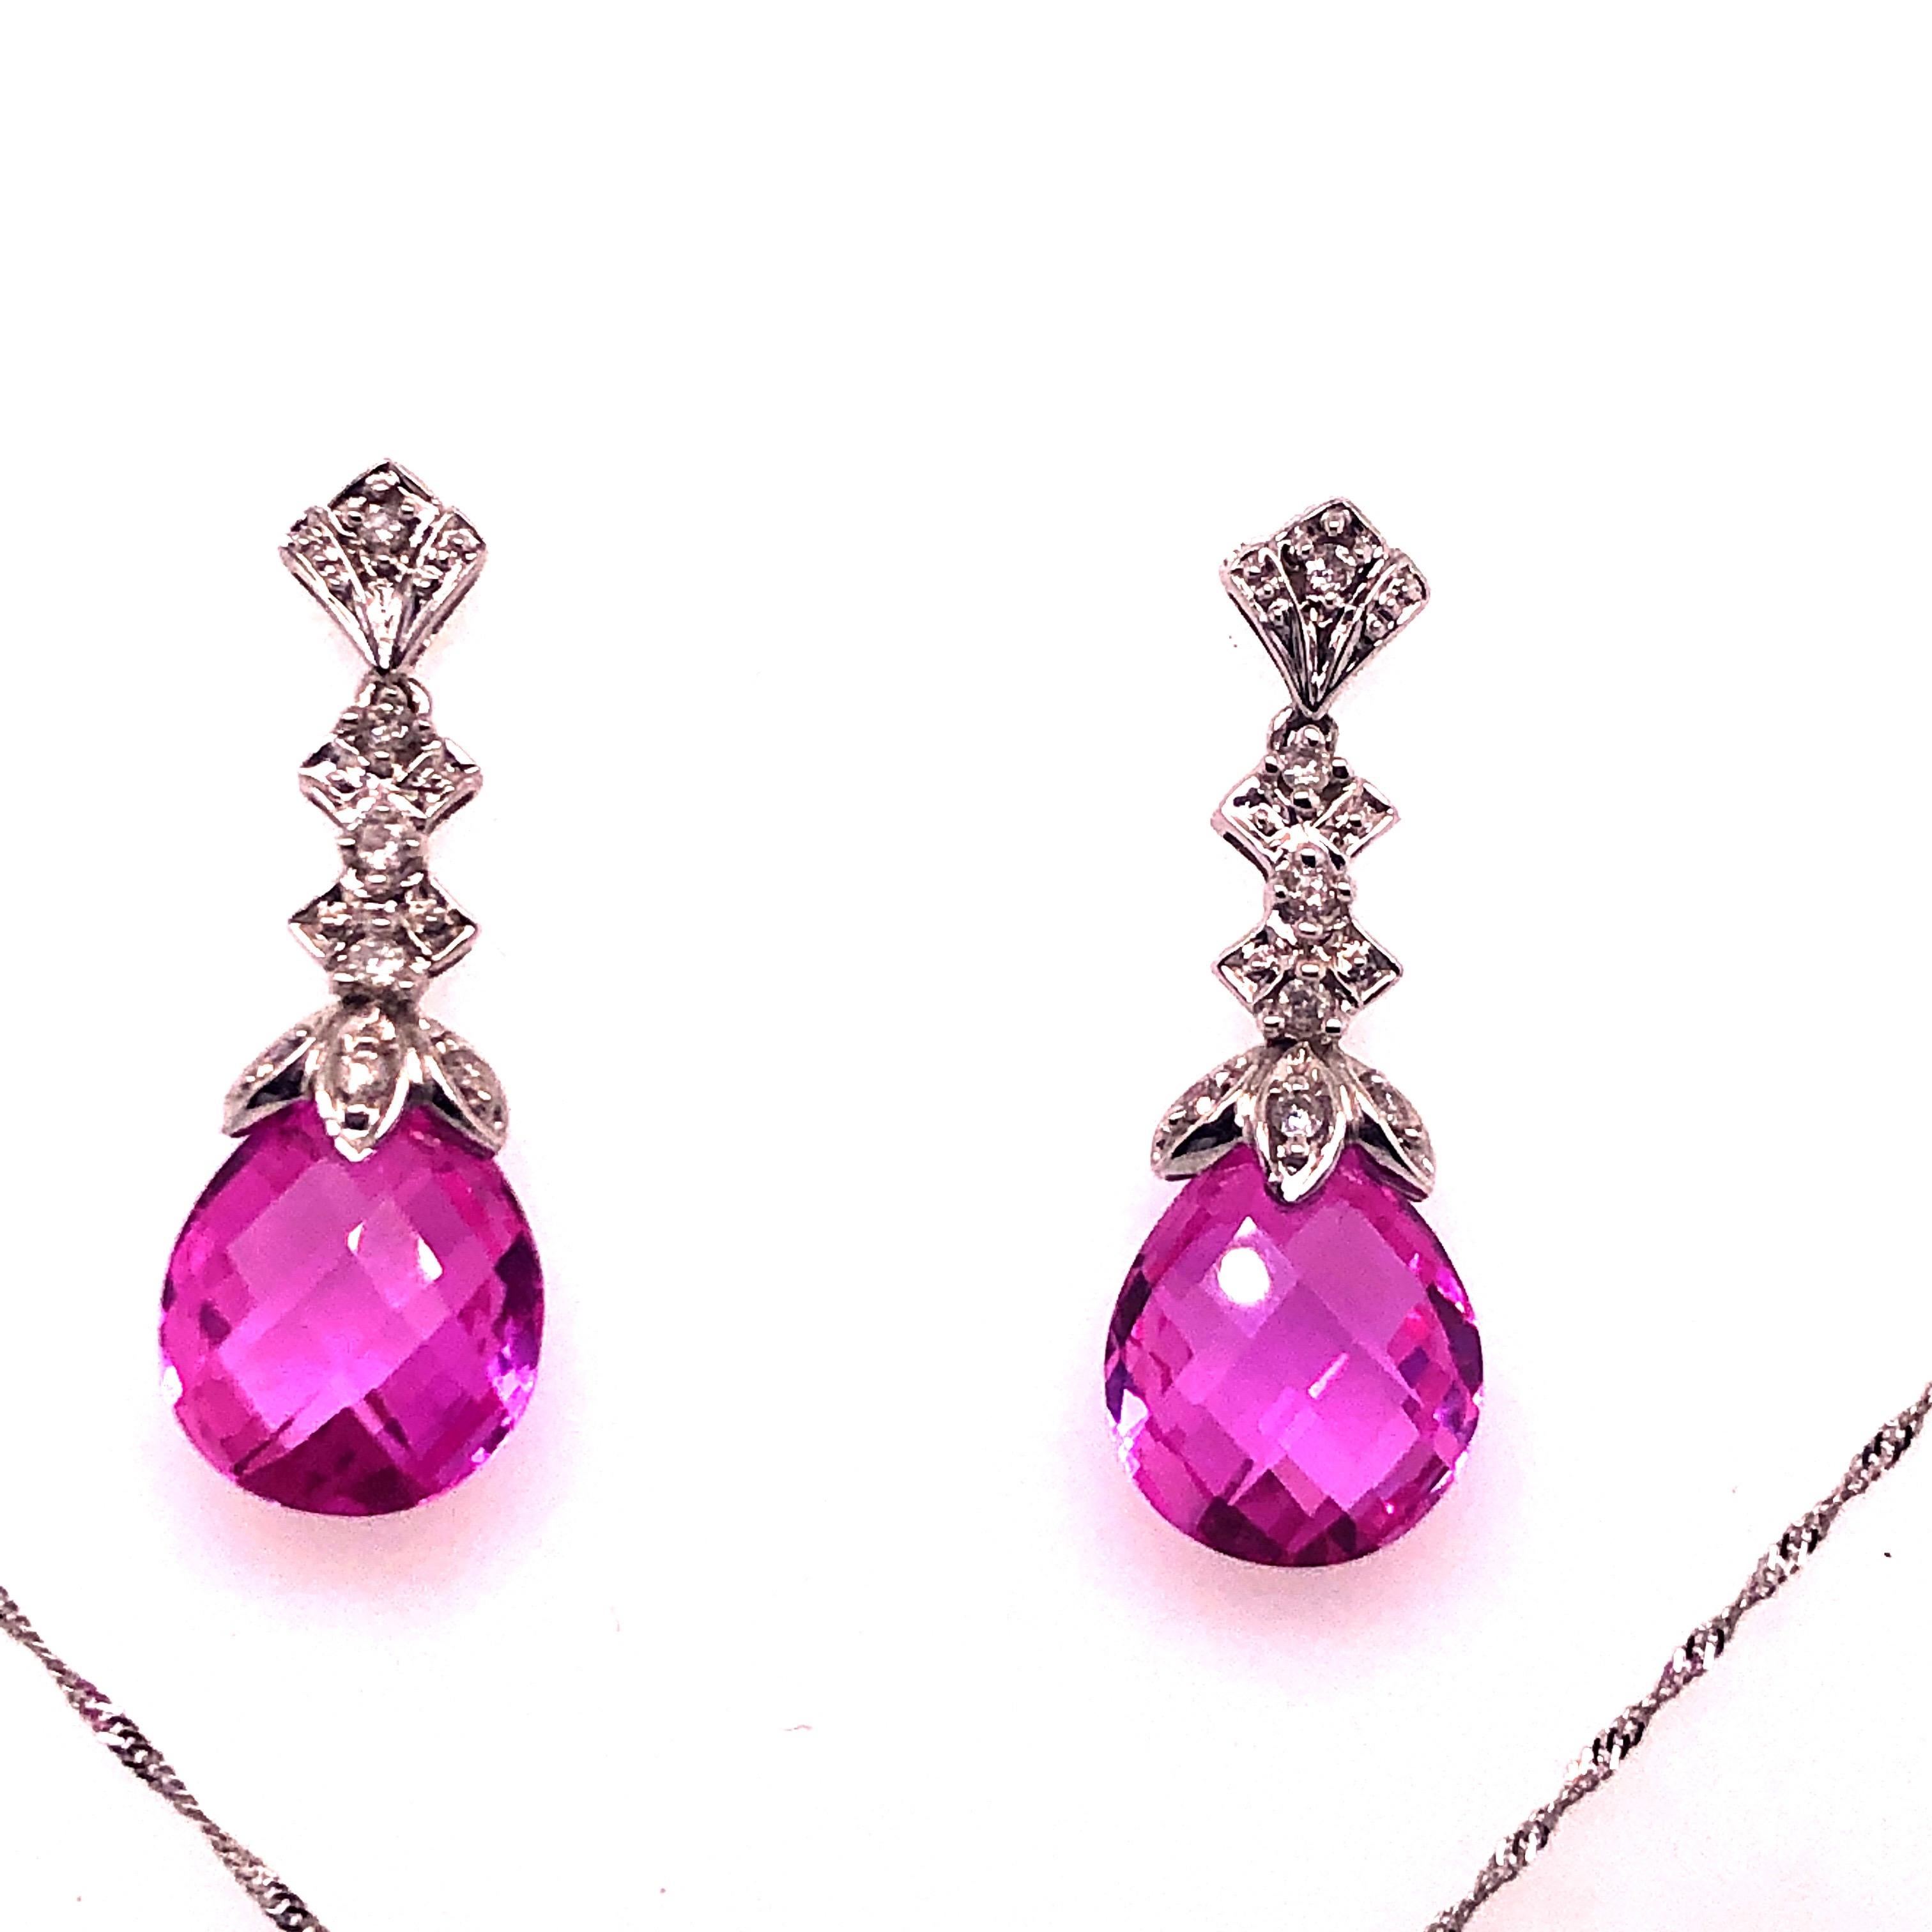 White Gold Diamond and Pink Stone Earrings and Necklace 1